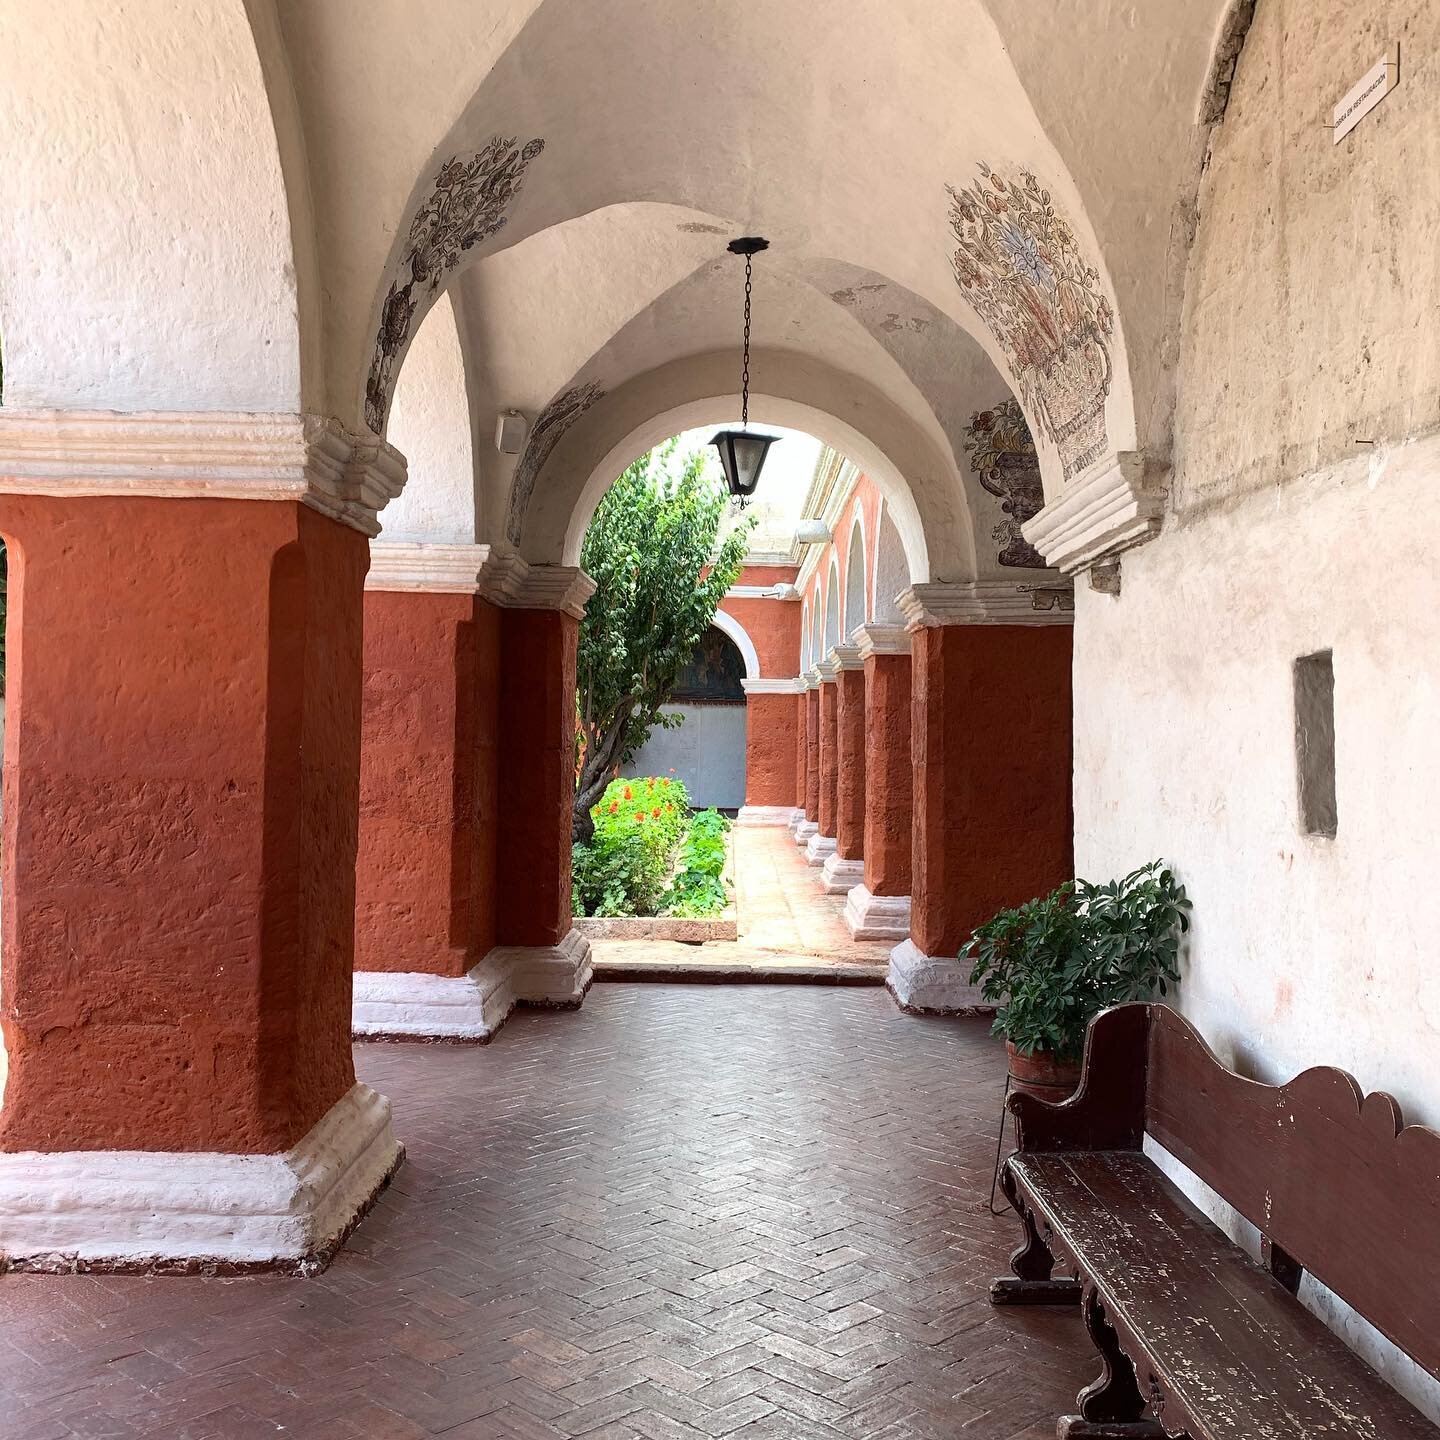 Monastery Santa Catalina in Arequipa. Gorgeous place to stroll through, so many special spaces and moments around here. #monastery #colour #lightandshadow